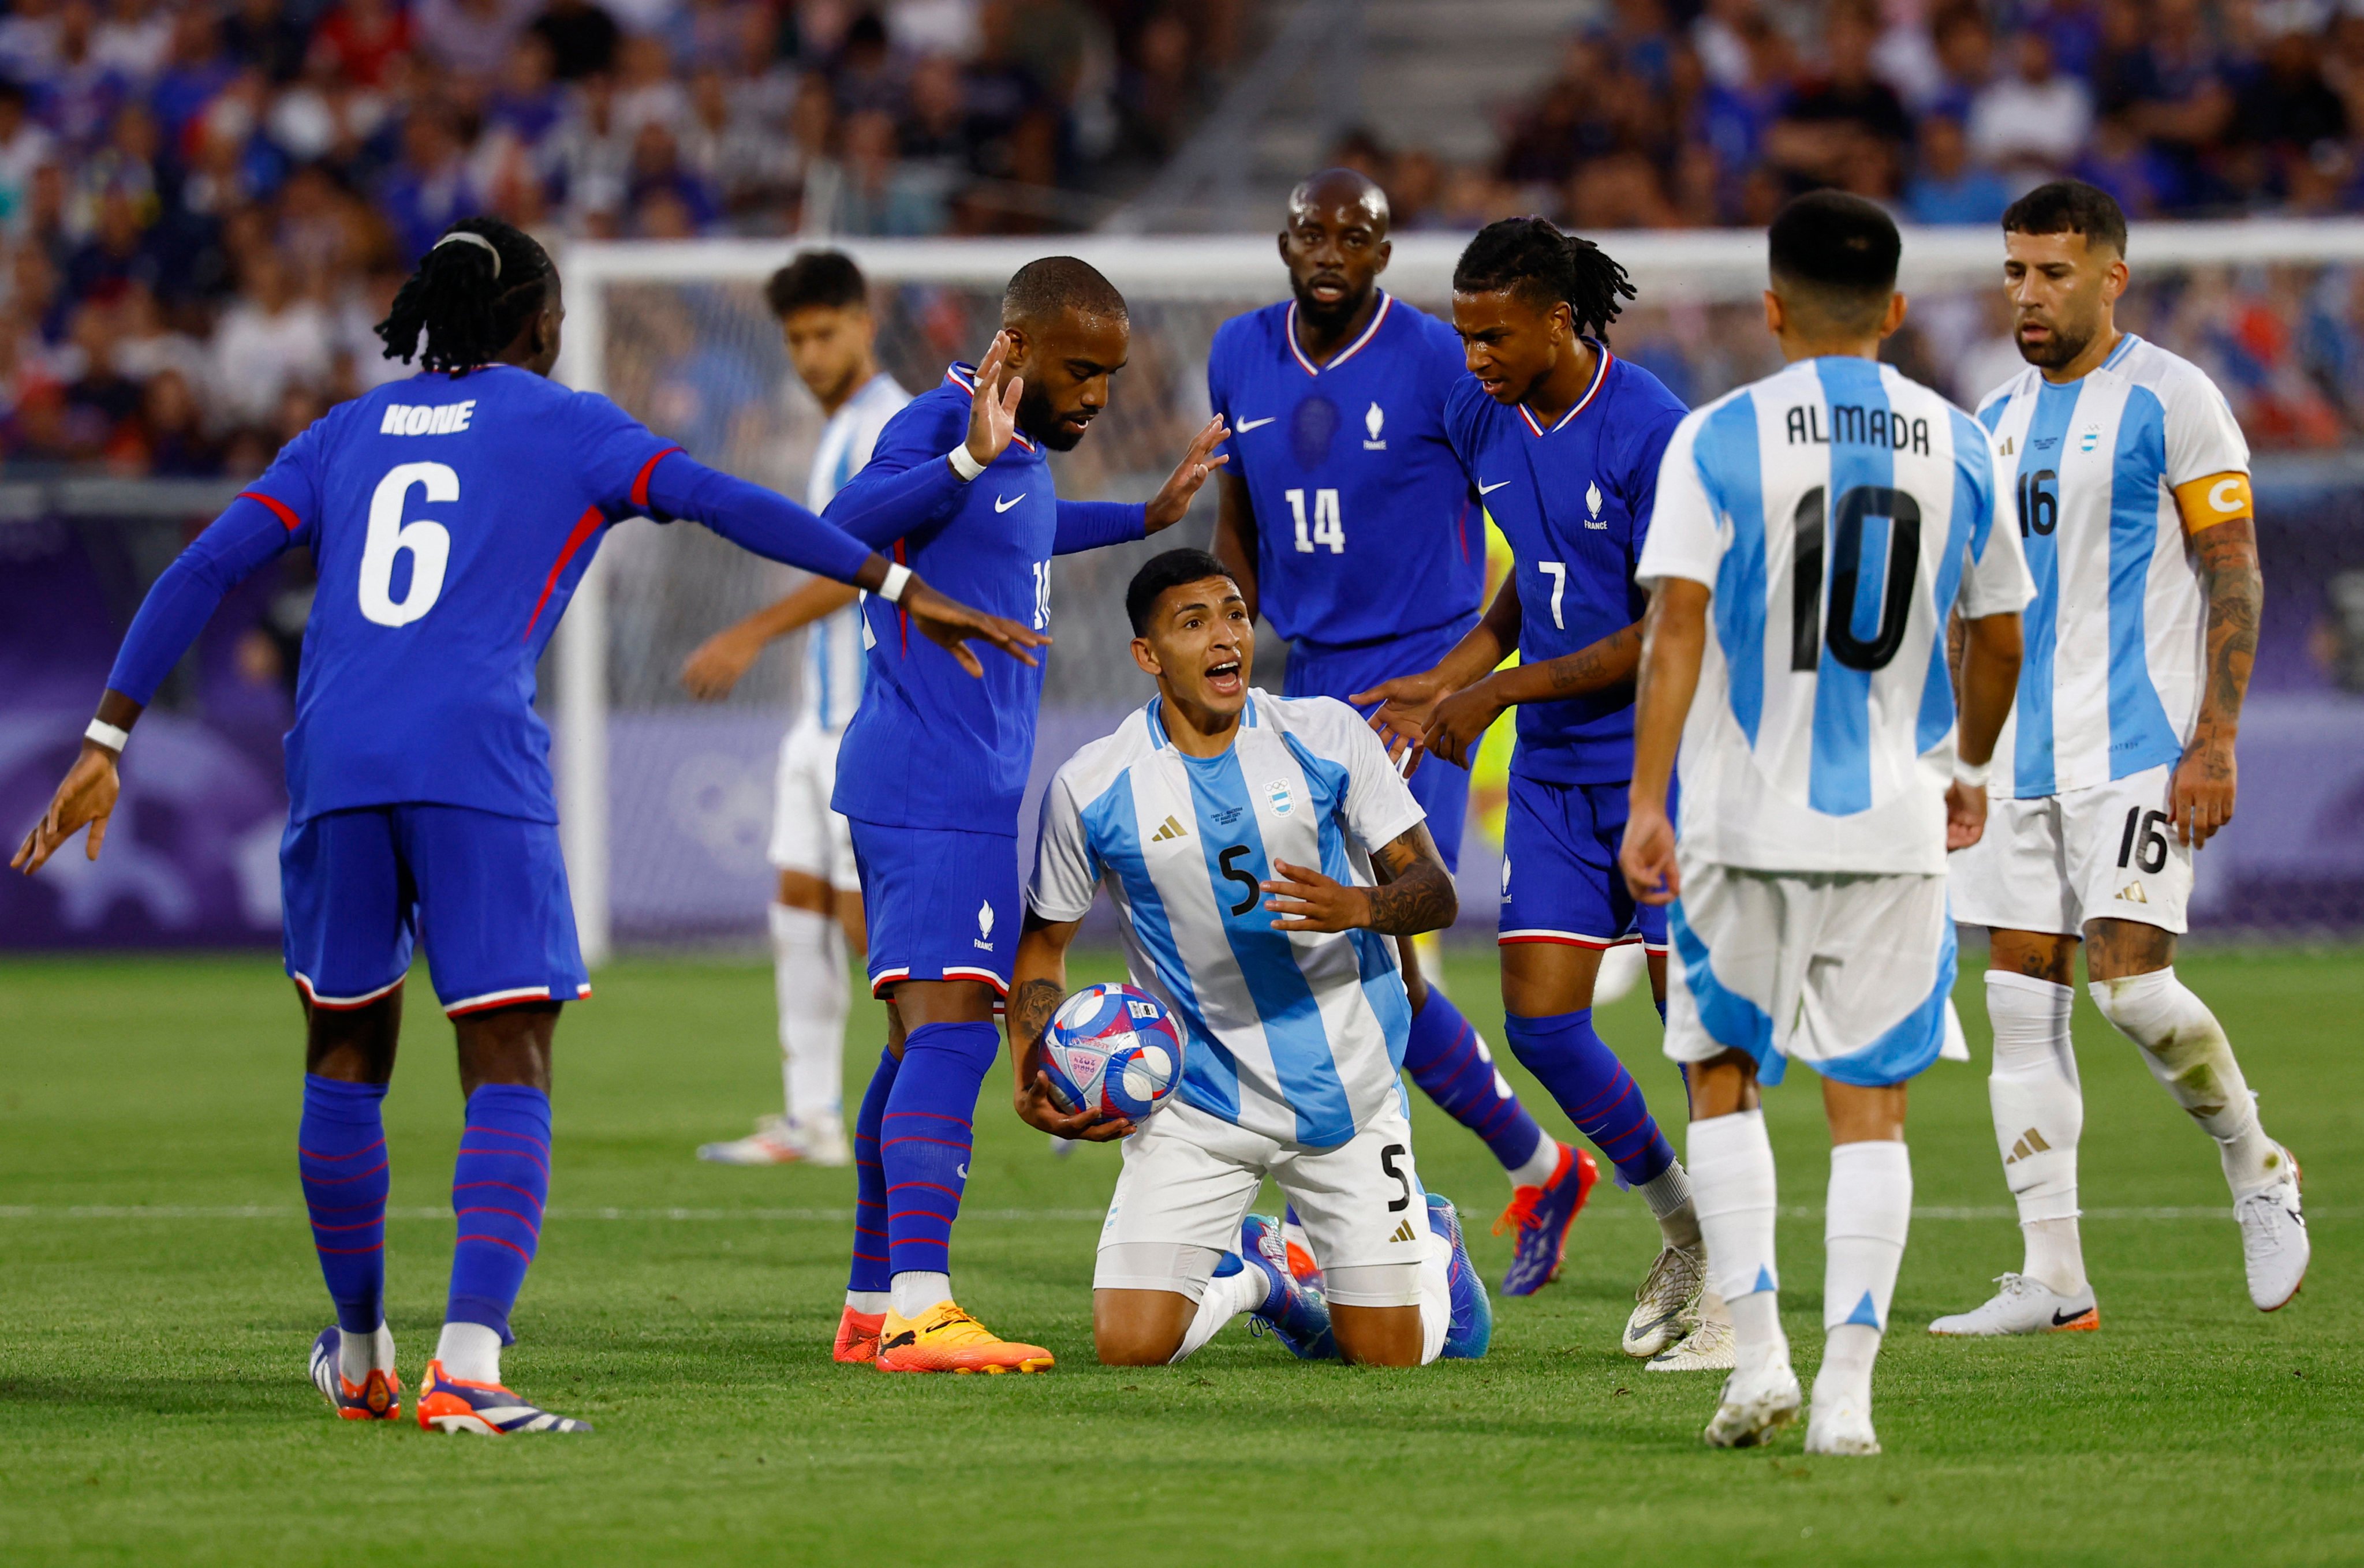 There was no love lost between the France and Argentina players during the Paris Olympics quarter-final clash. Photo: Reuters